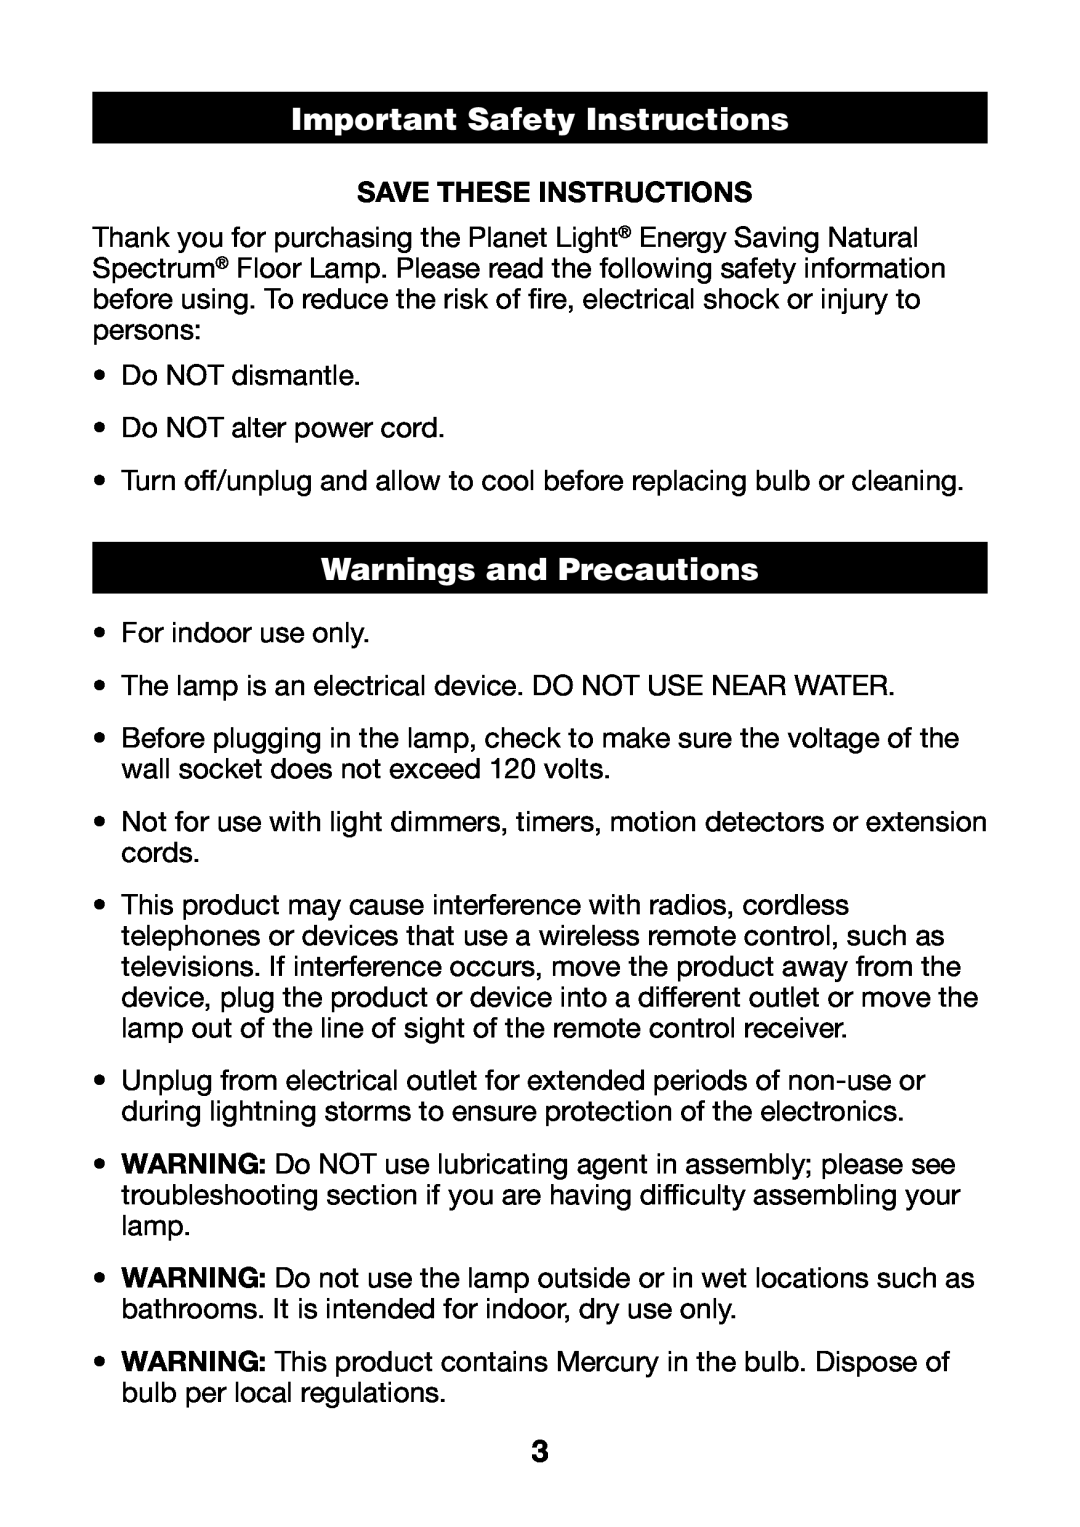 Verilux PL04 manual Important Safety Instructions, Warnings and Precautions, Save These Instructions 